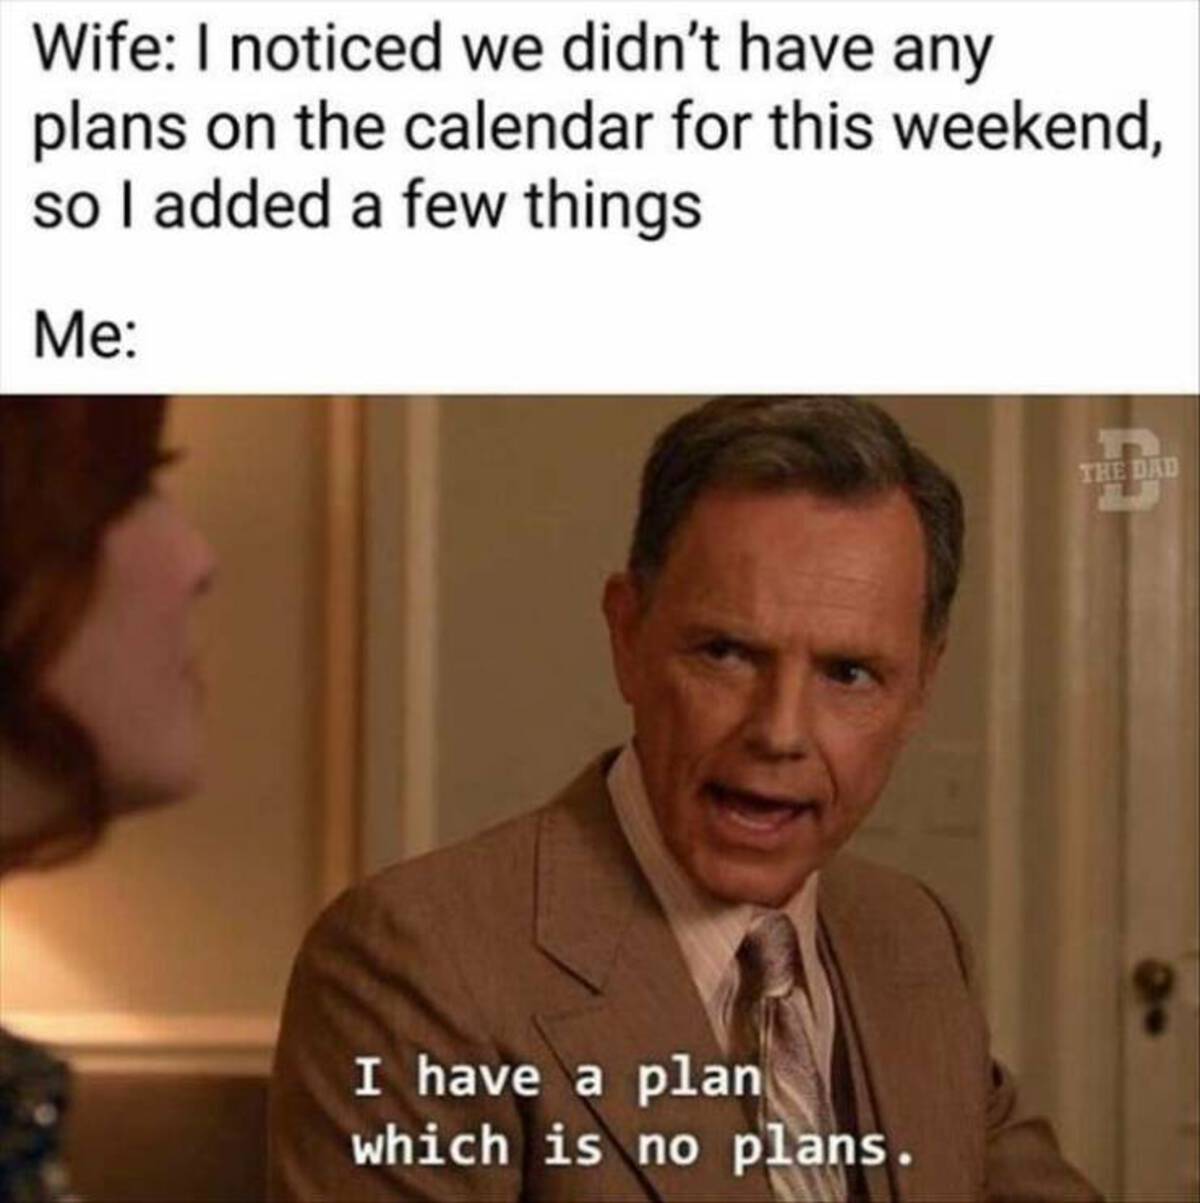 photo caption - Wife I noticed we didn't have any plans on the calendar for this weekend, so I added a few things Me I have a plan which is no plans. The Dad